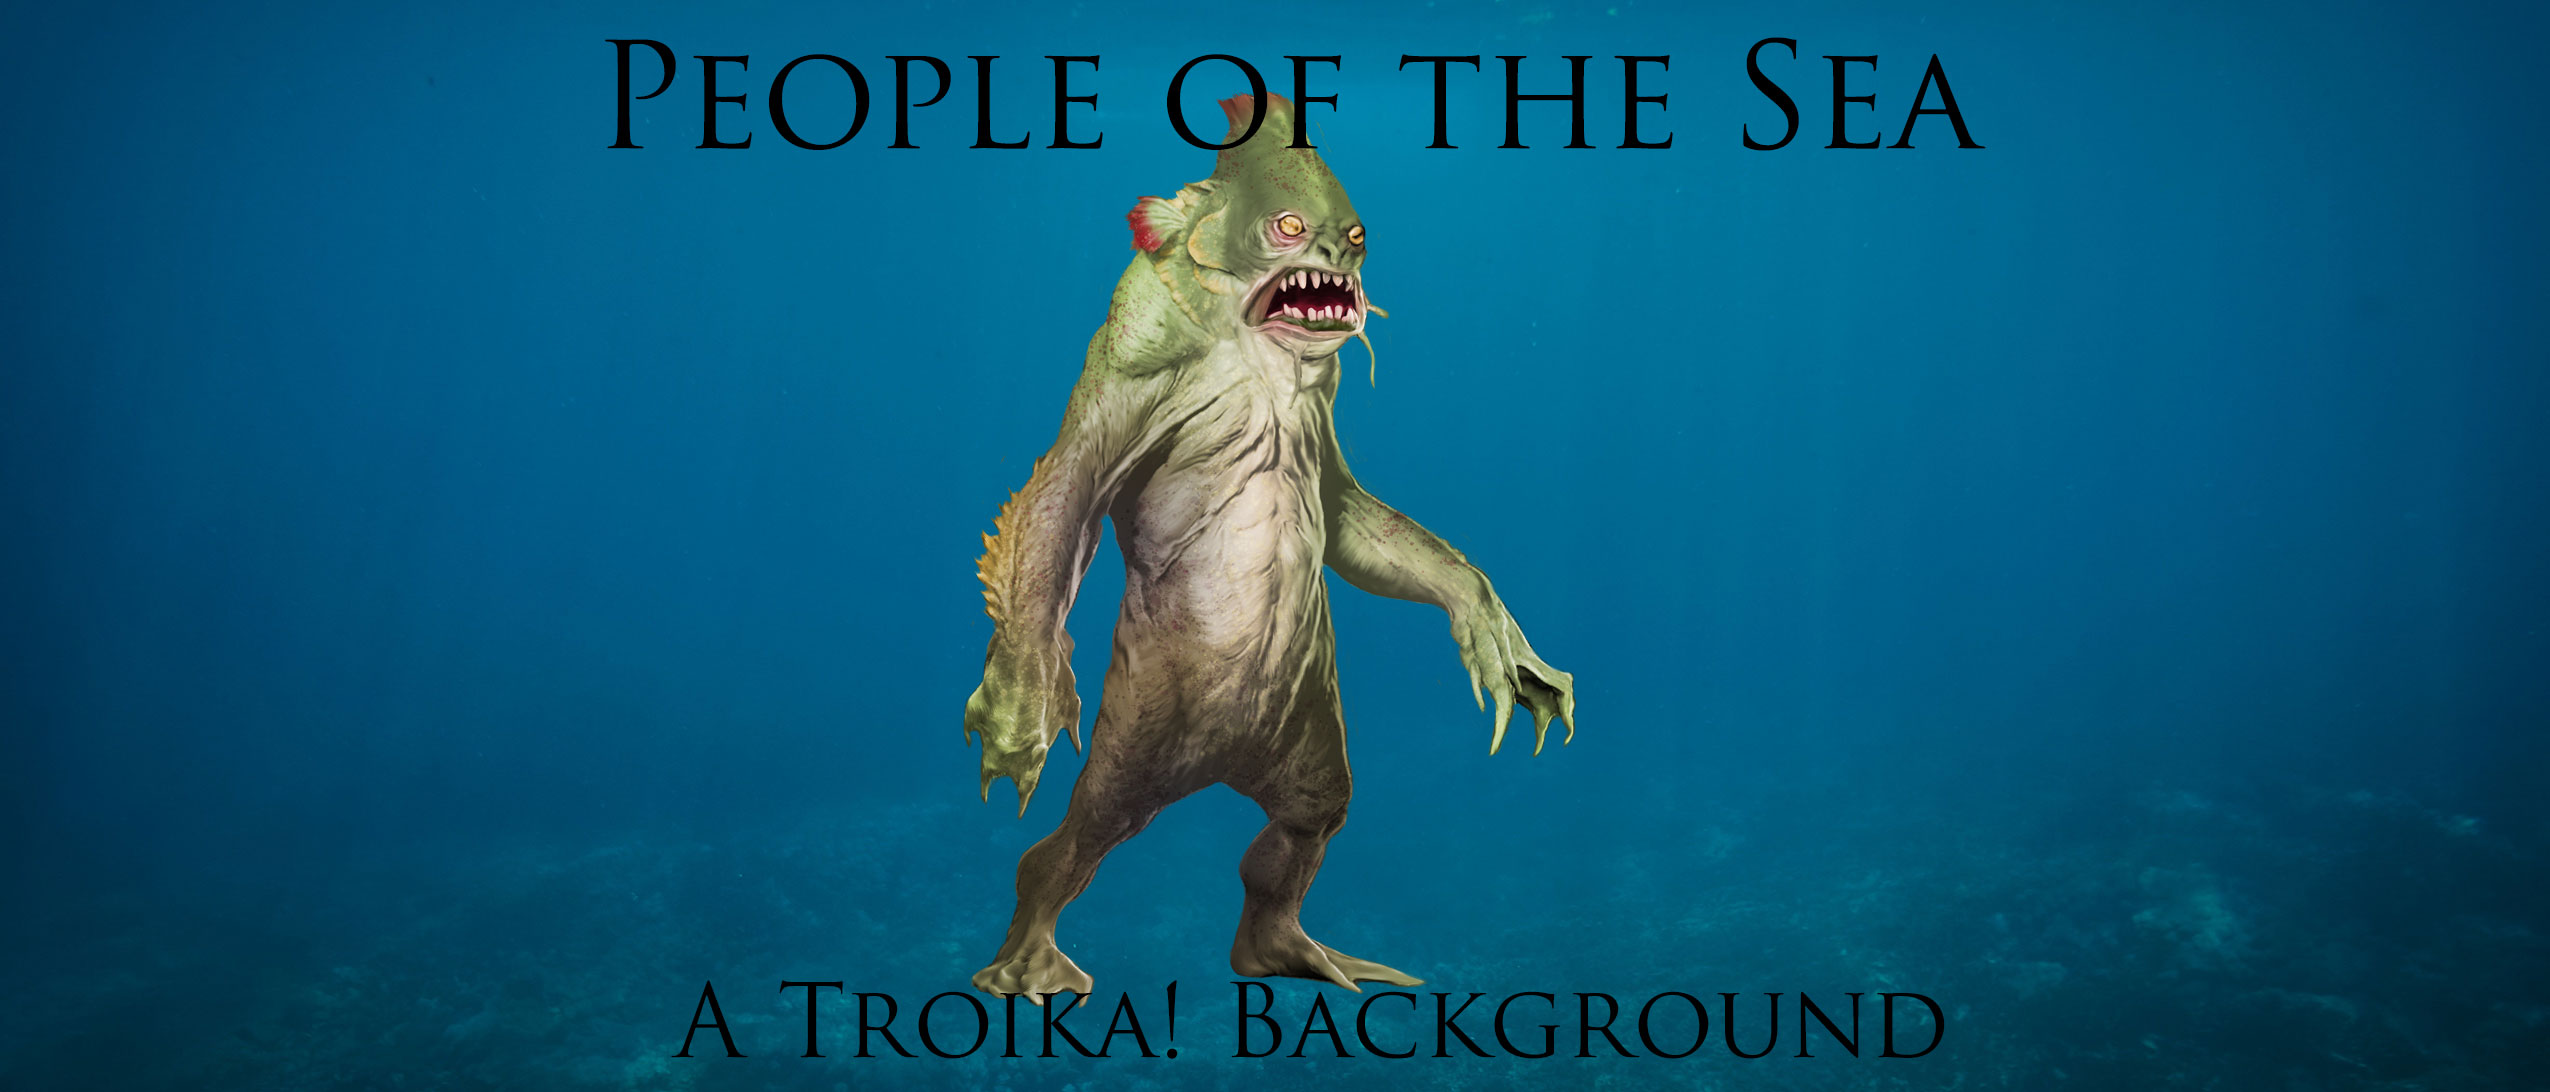 People of the Sea - A Troika! Background